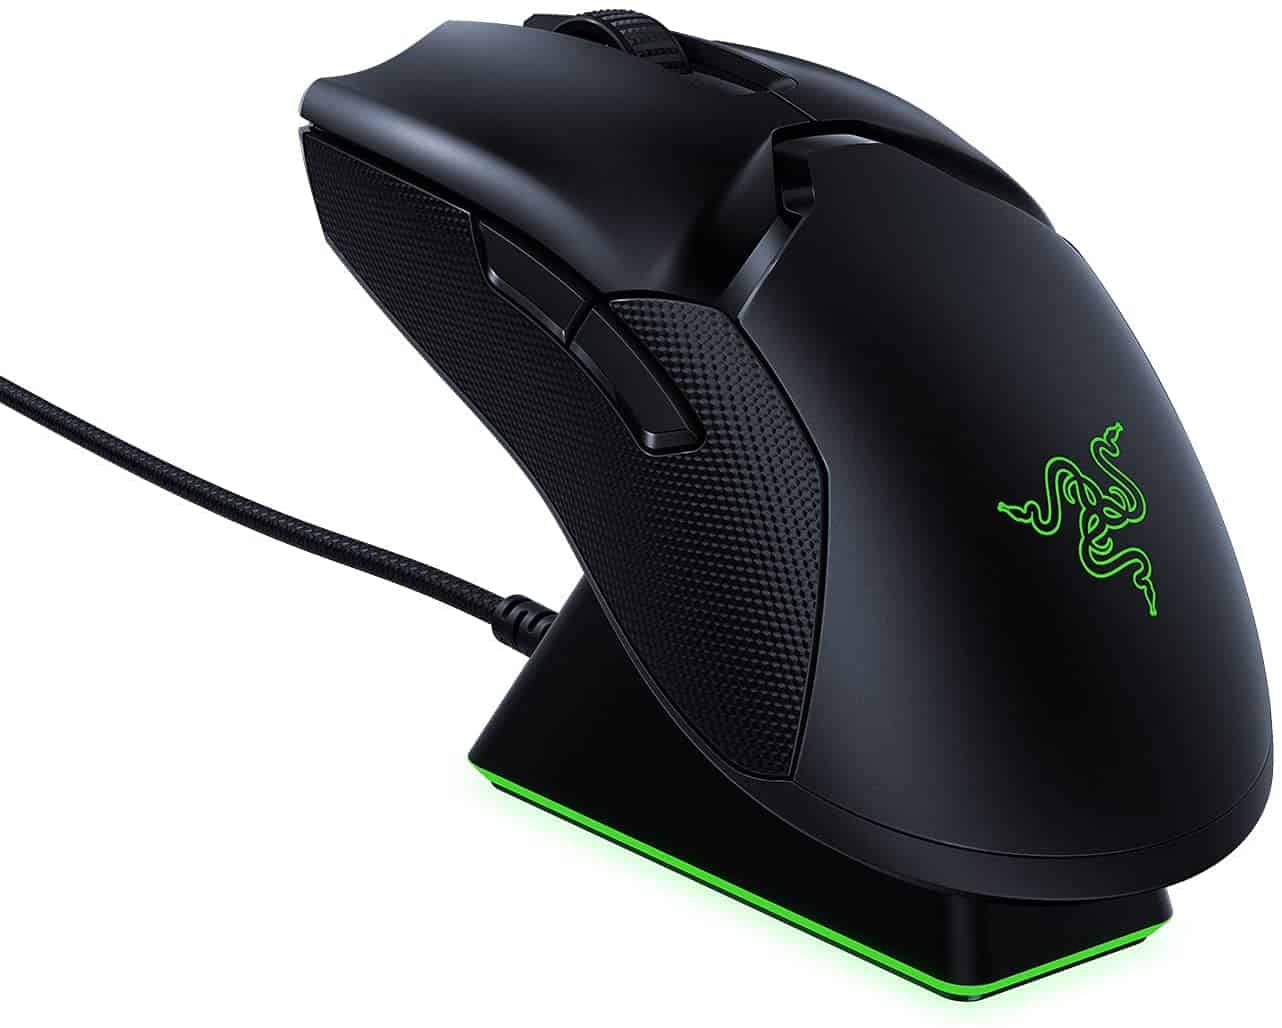 Razer Viper Ultimate Wireless Gaming Mouse with Dock Station